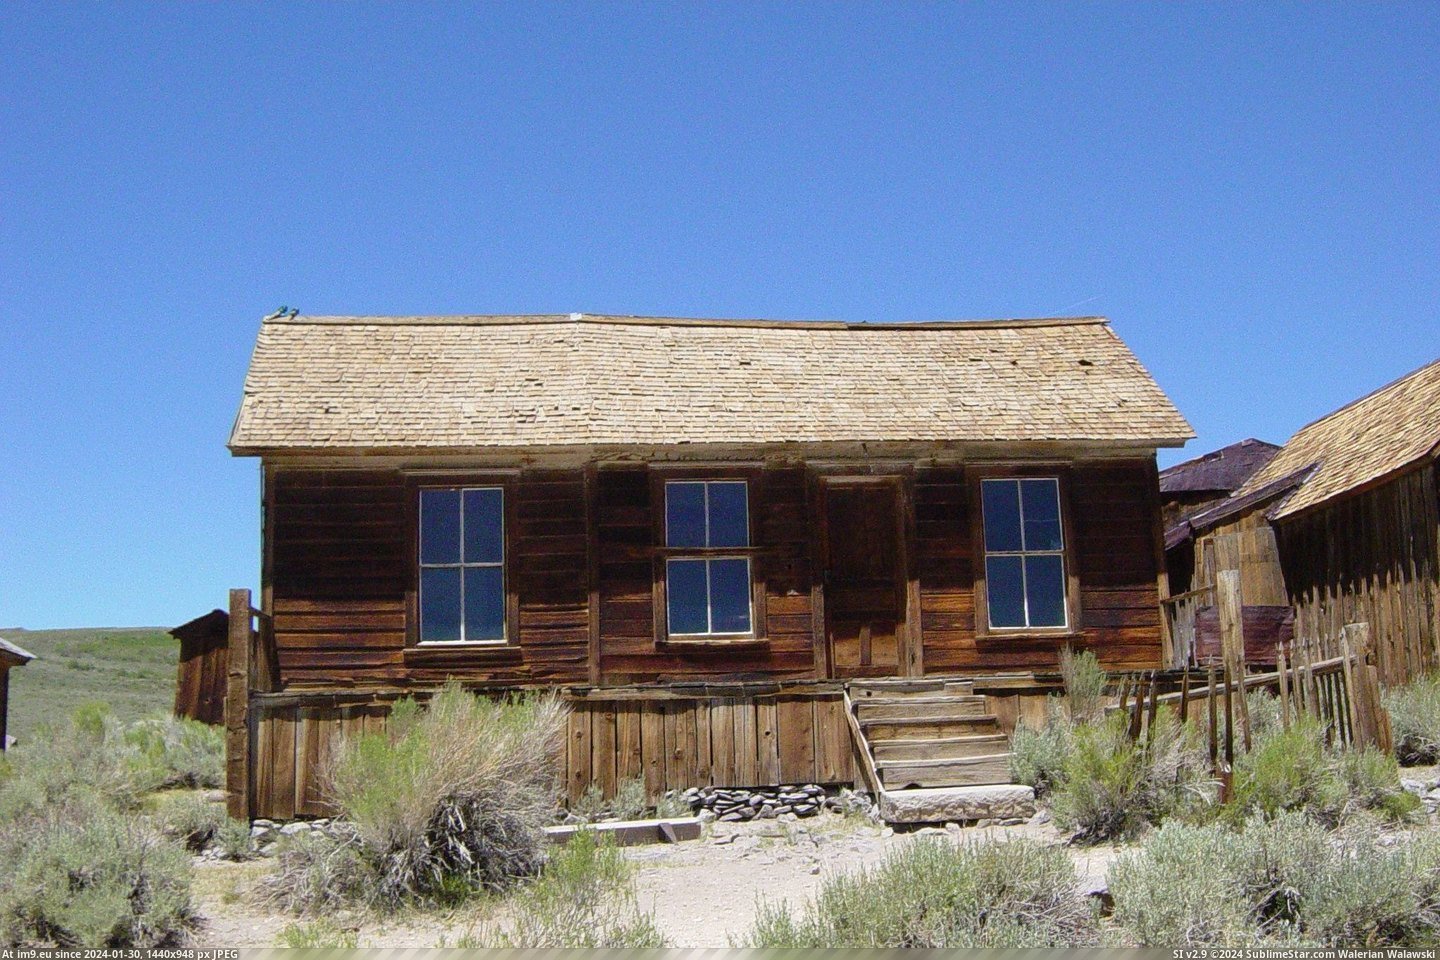 #California #Cameron #Bodie #House Cameron House In Bodie, California Pic. (Изображение из альбом Bodie - a ghost town in Eastern California))